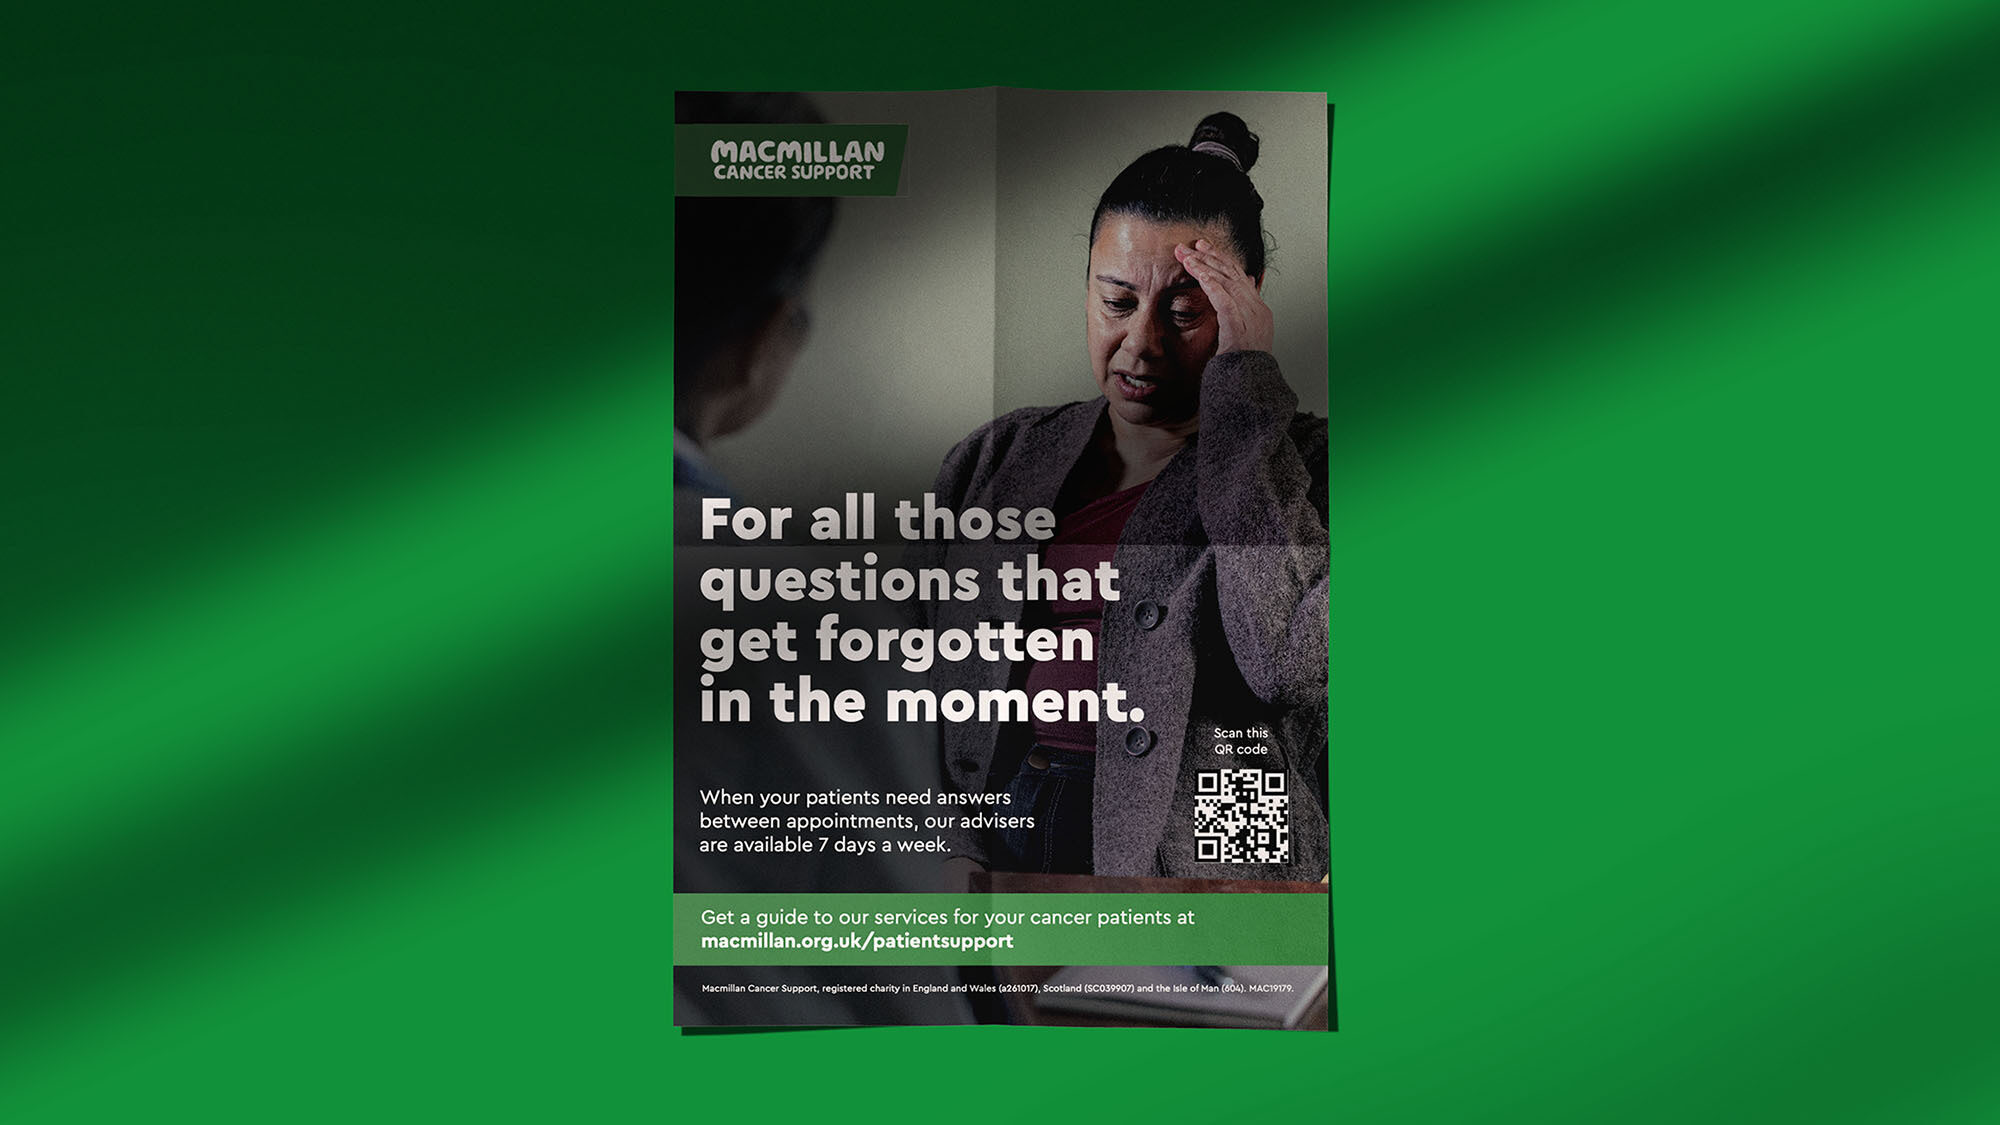 Print flyer digital asset from Macmillan's campaign reads: 'For all those cancer questions that get forgotten in the moment.'